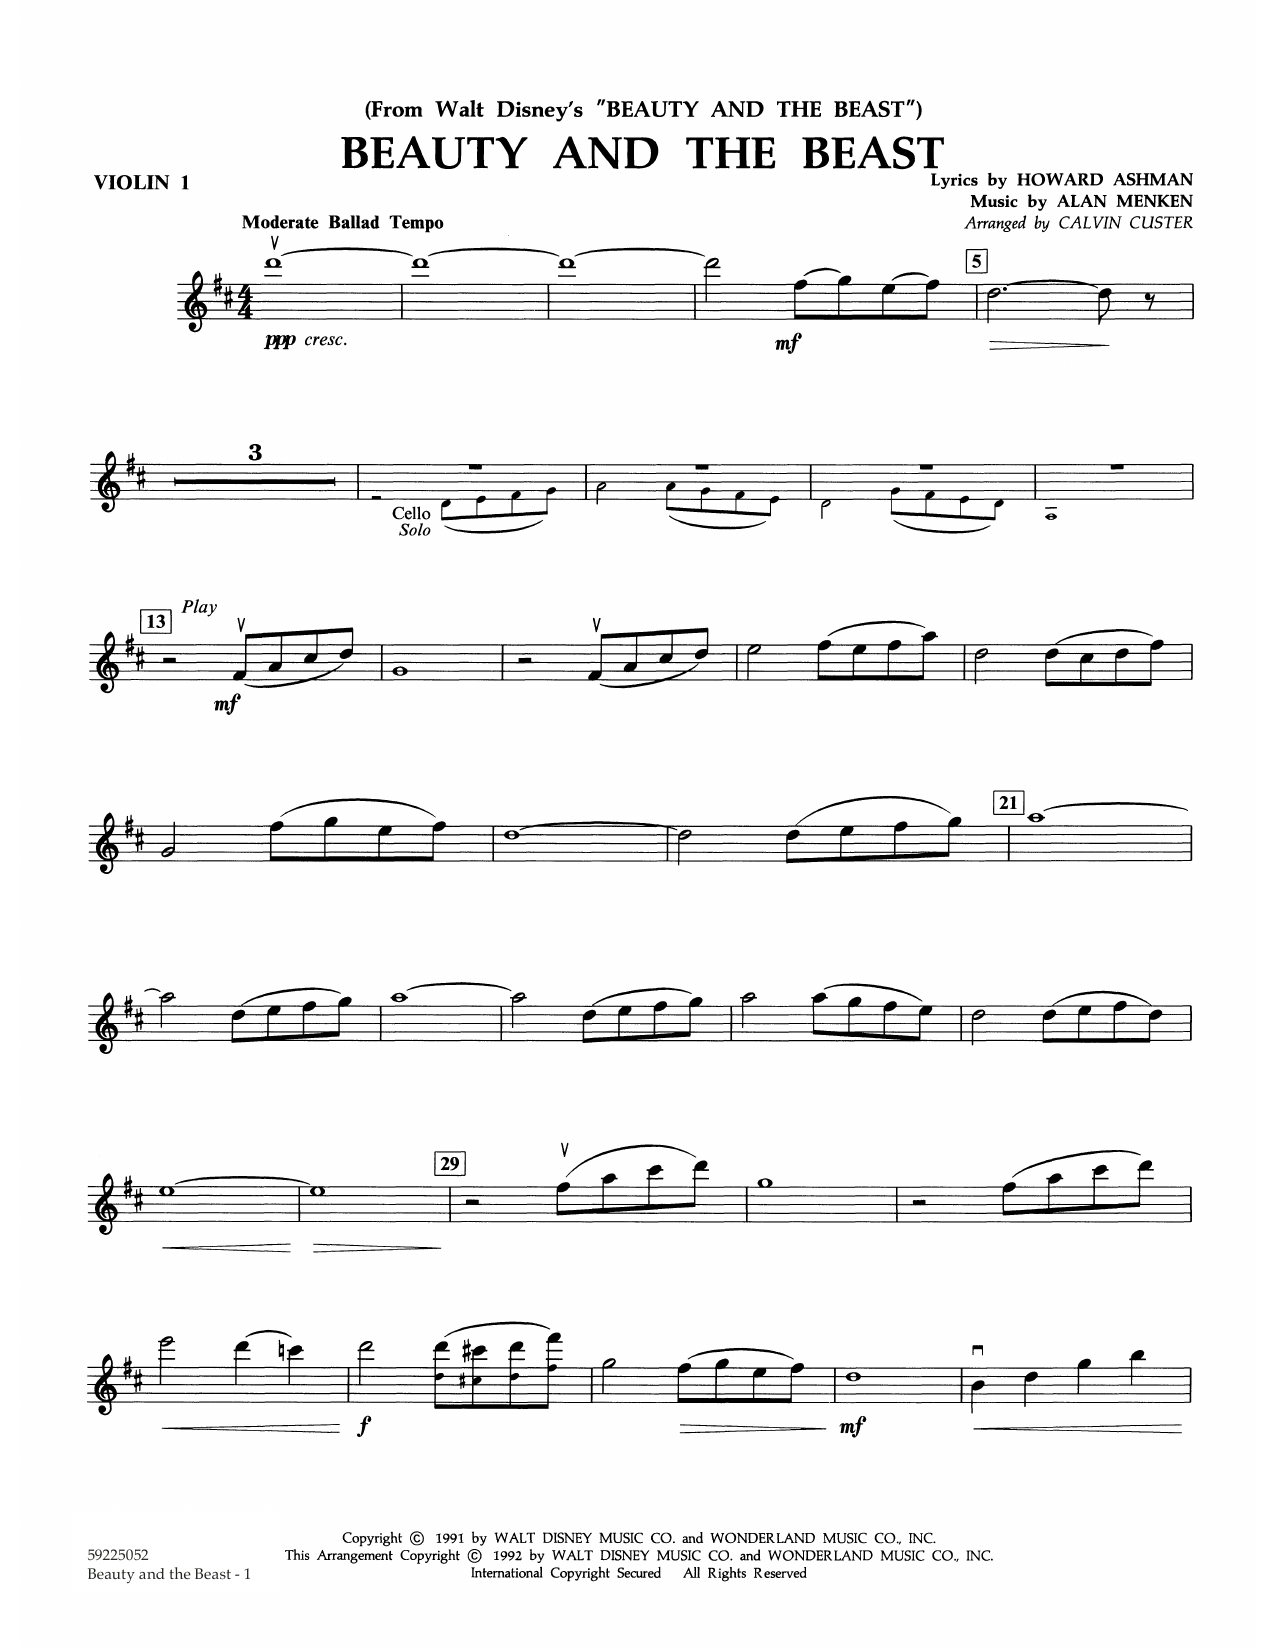 Alan Menken Beauty And The Beast Arr Calvin Custer Violin 1 Sheet Music Download Printable Disney Pdf Orchestra Score Sku 371535 Source beauty and the beast: alan menken beauty and the beast arr calvin custer violin 1 sheet music notes chords download printable orchestra sku 371535